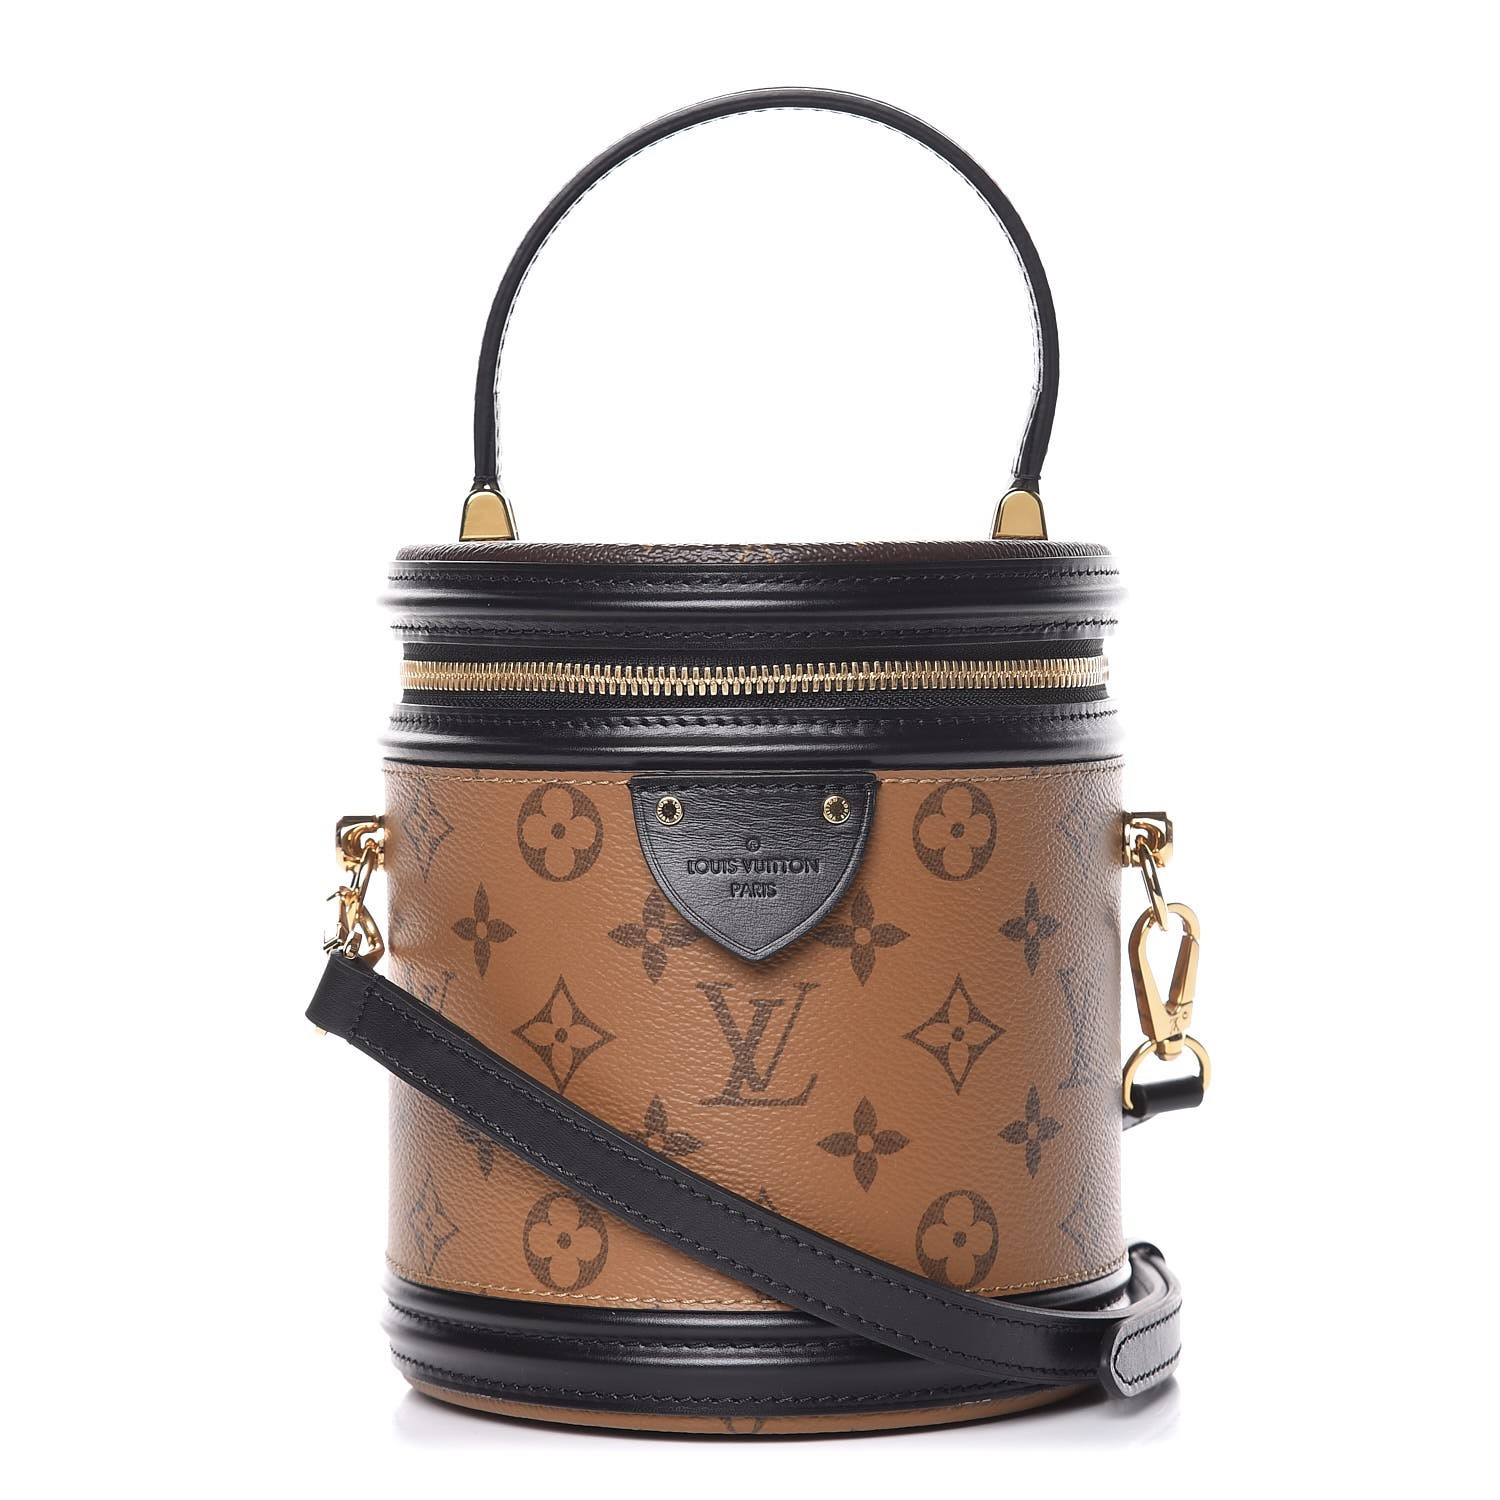 01x08 “The Best Things in Life” - December 6, 2017 Louis Vuitton “Epi Cannes  Noir Black” - $1,500.00 (no longer available) #Dyna…